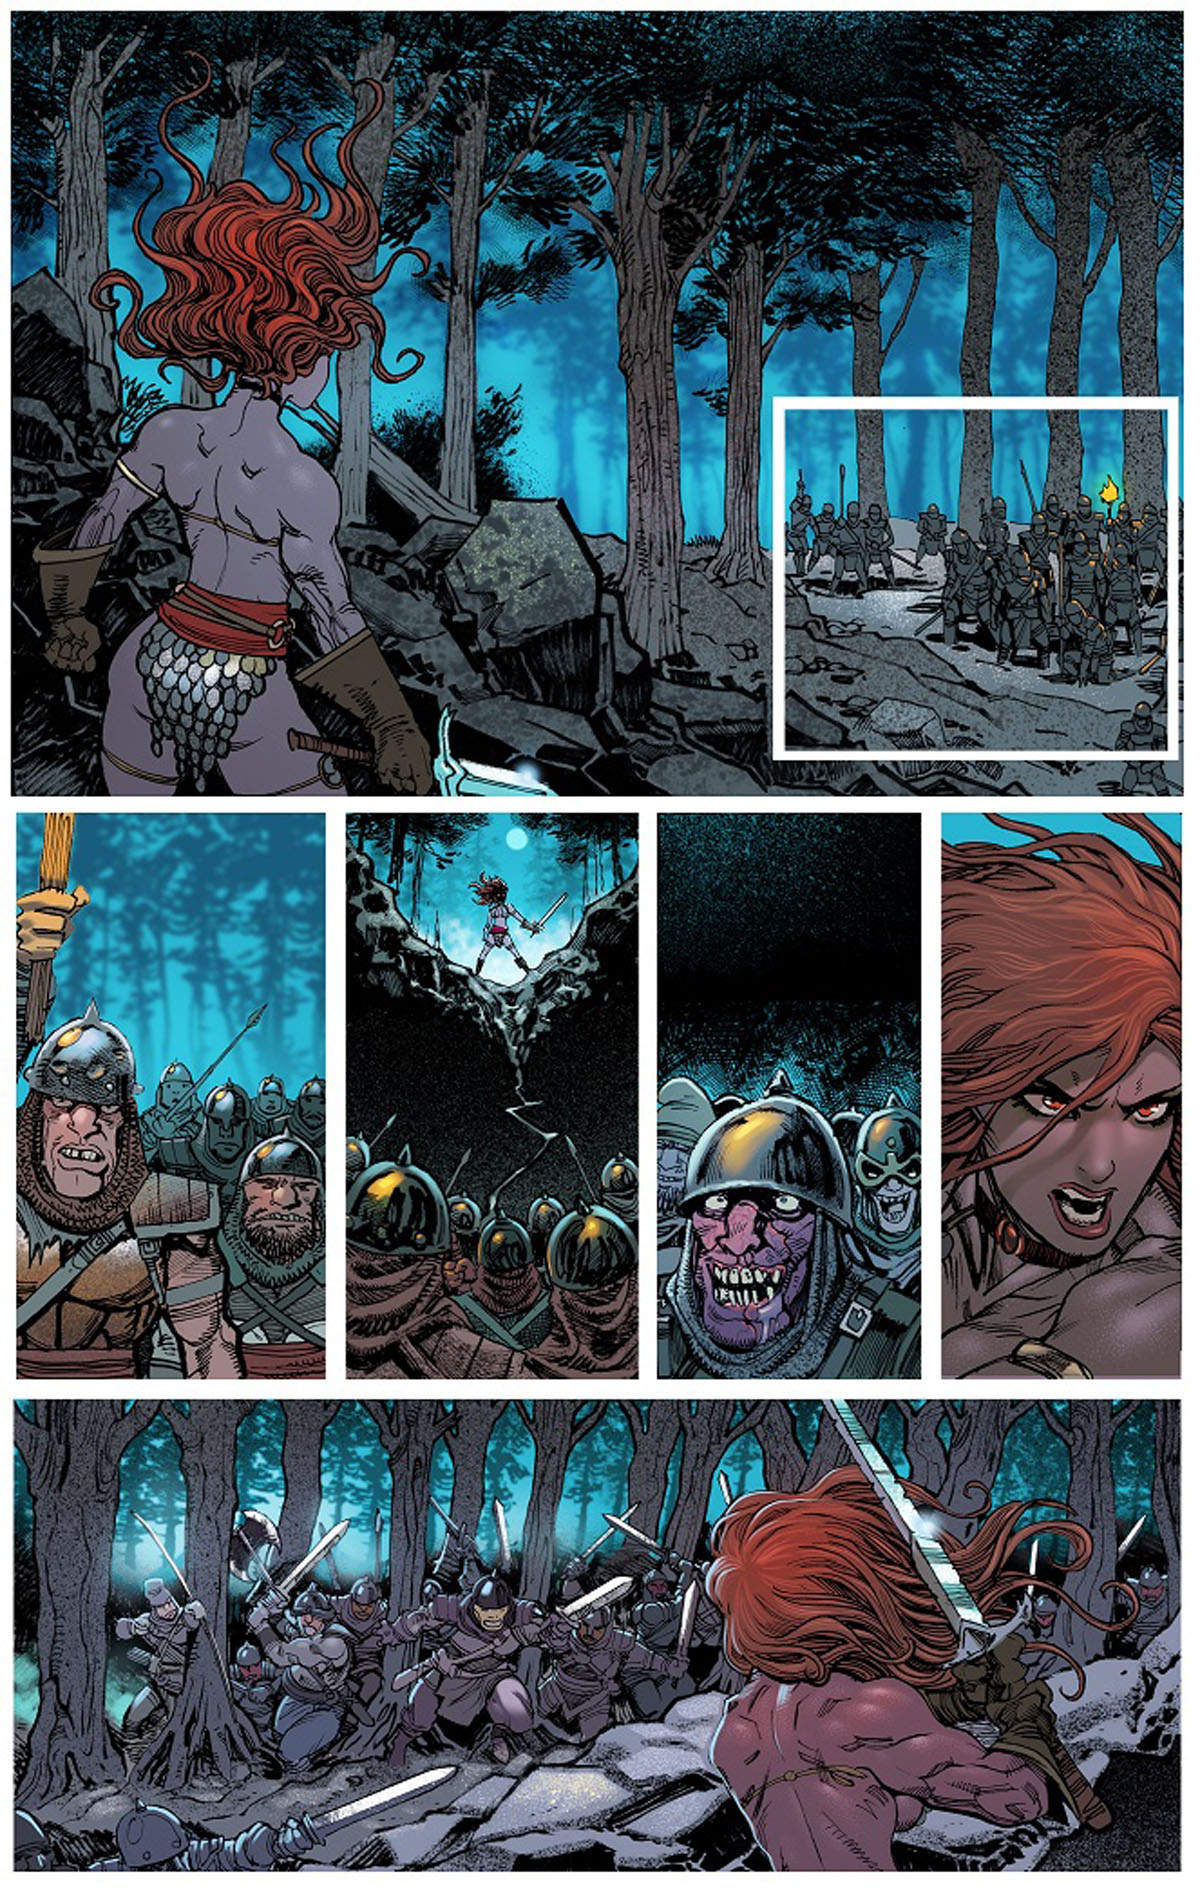 The Invincible Red Sonja #1 interior pages #1